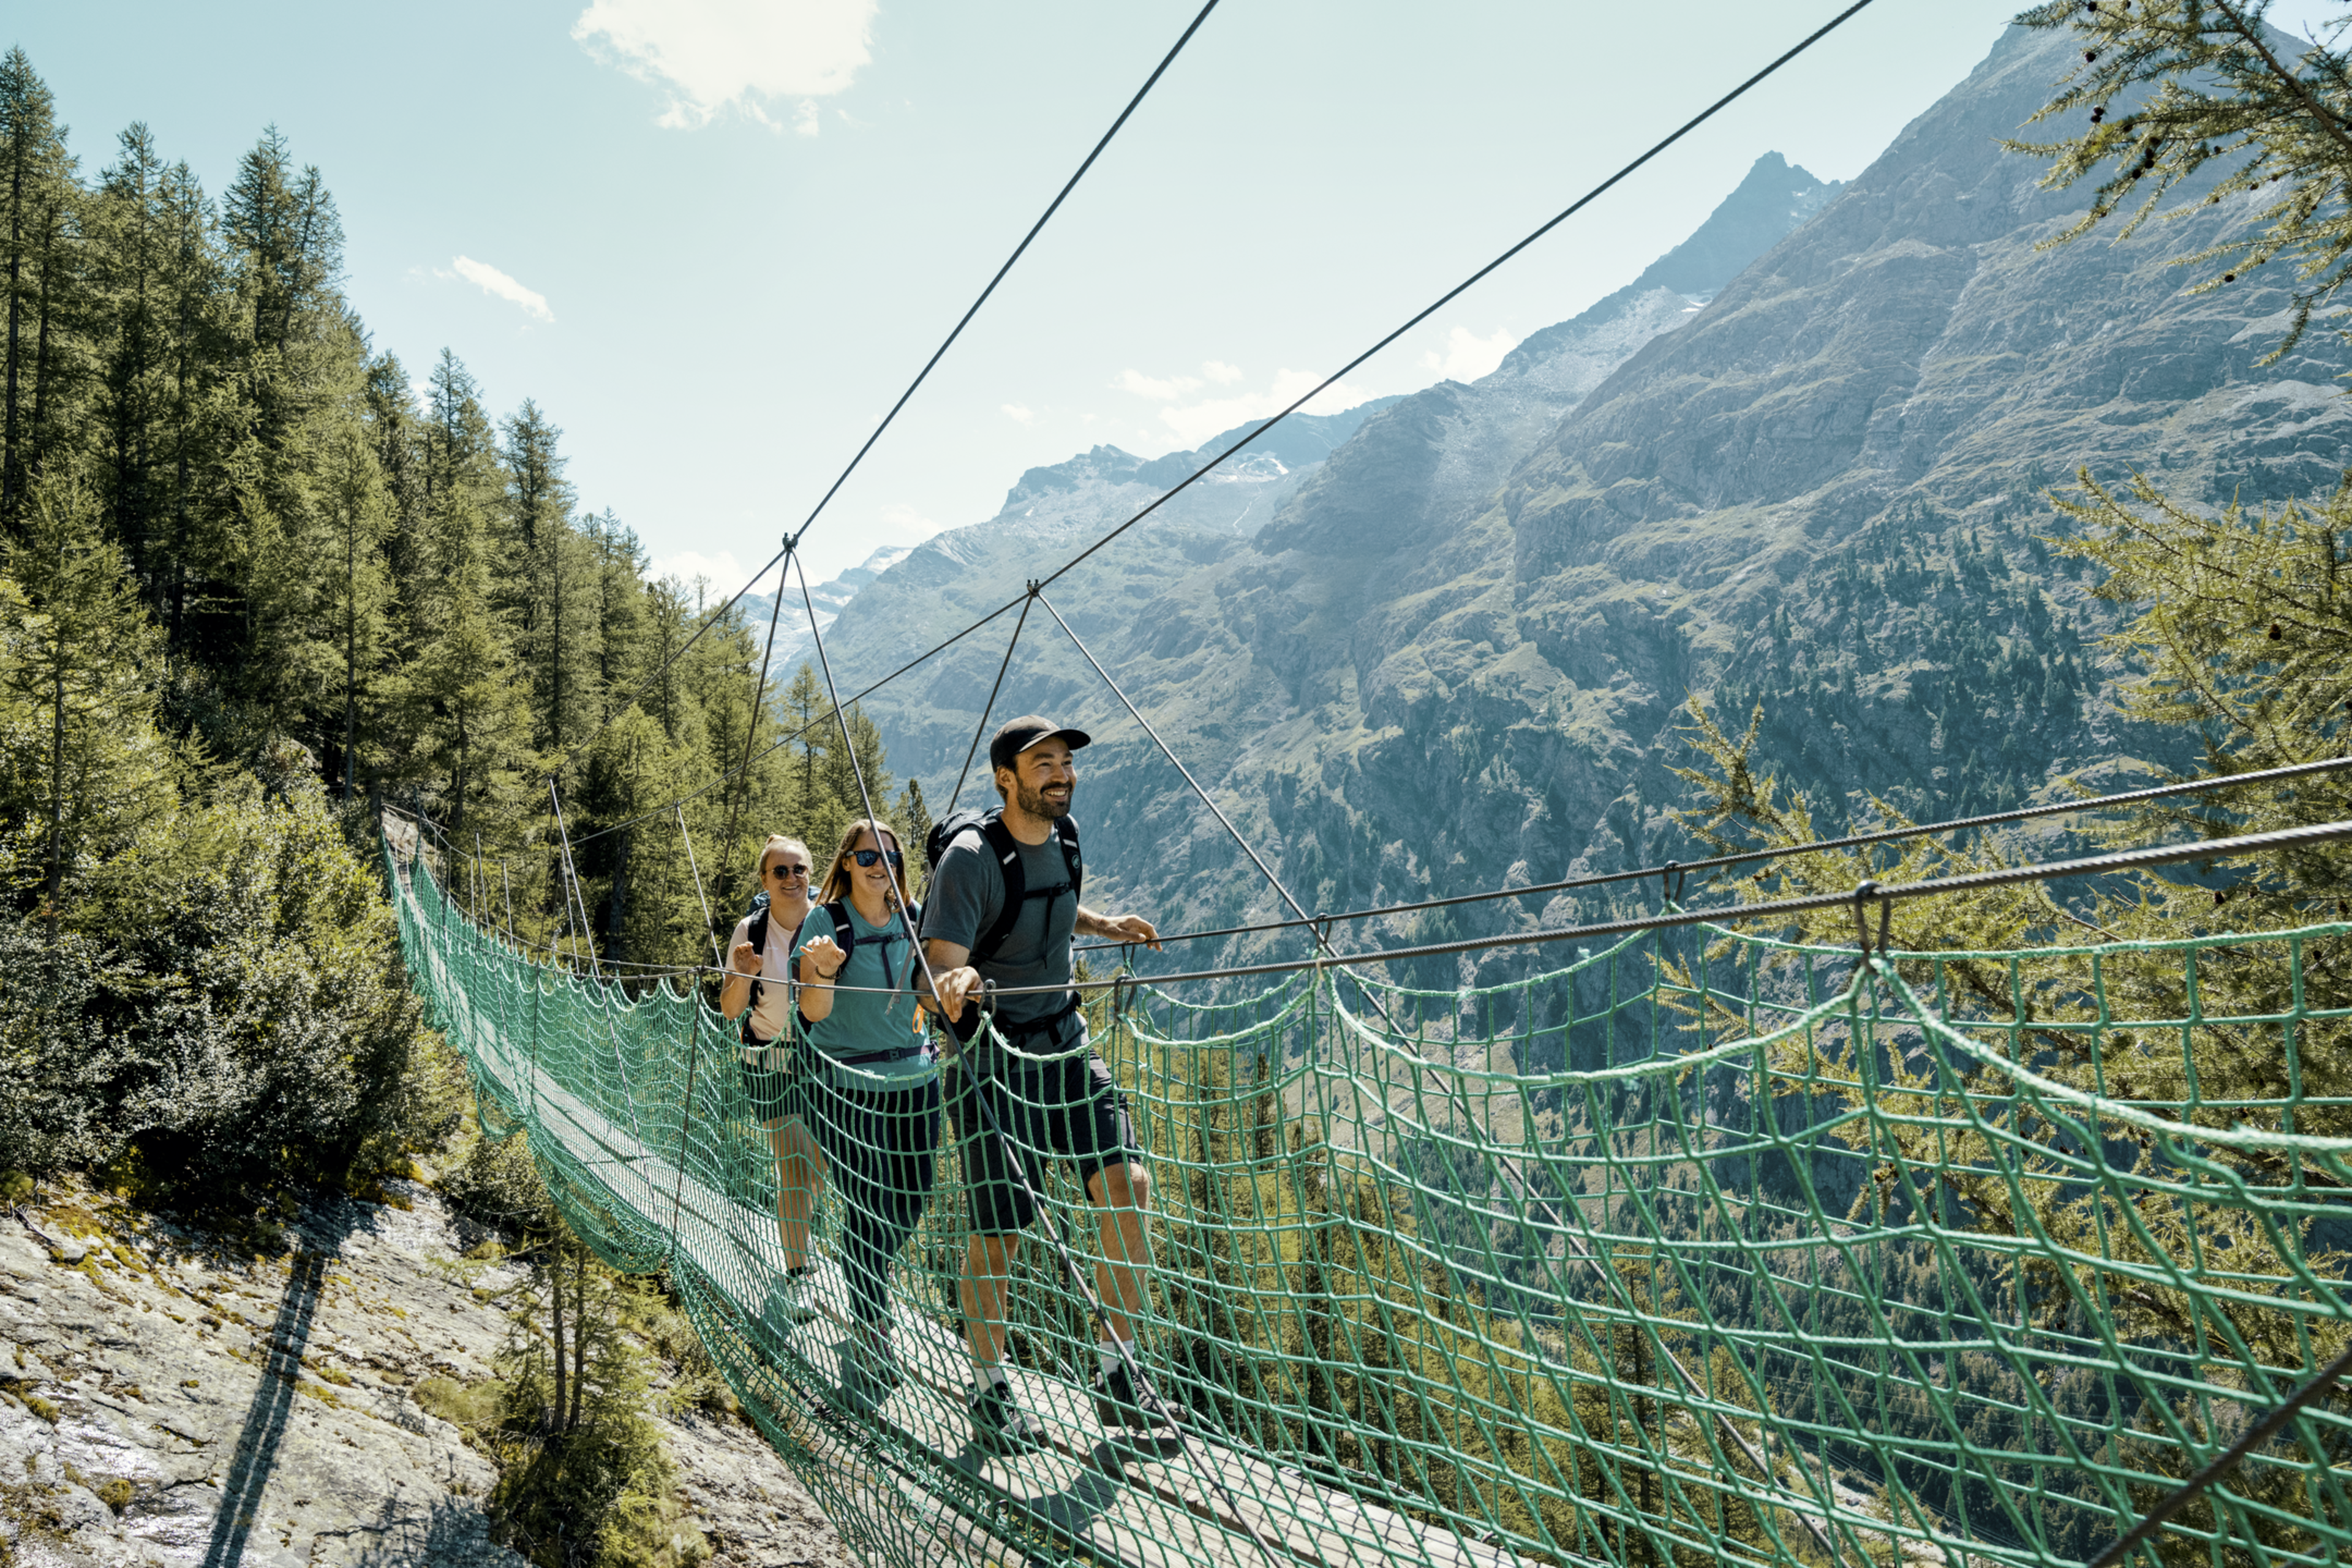 The first of two suspension bridges, both with breathtaking views.